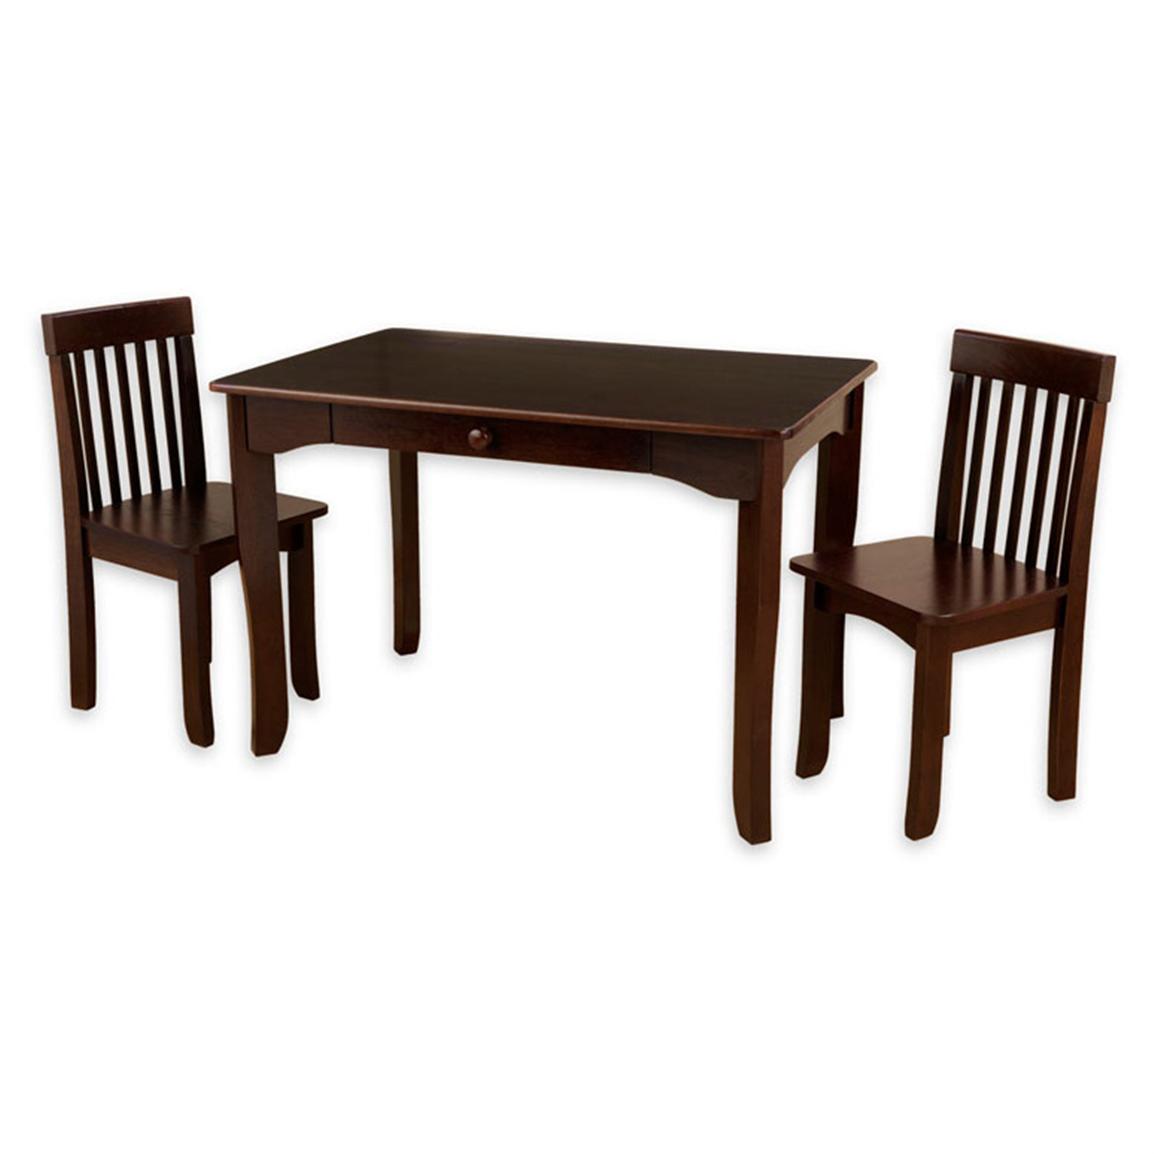 KidKraft® Avalon Table and Chair Set - 170708, Kid's Furniture at